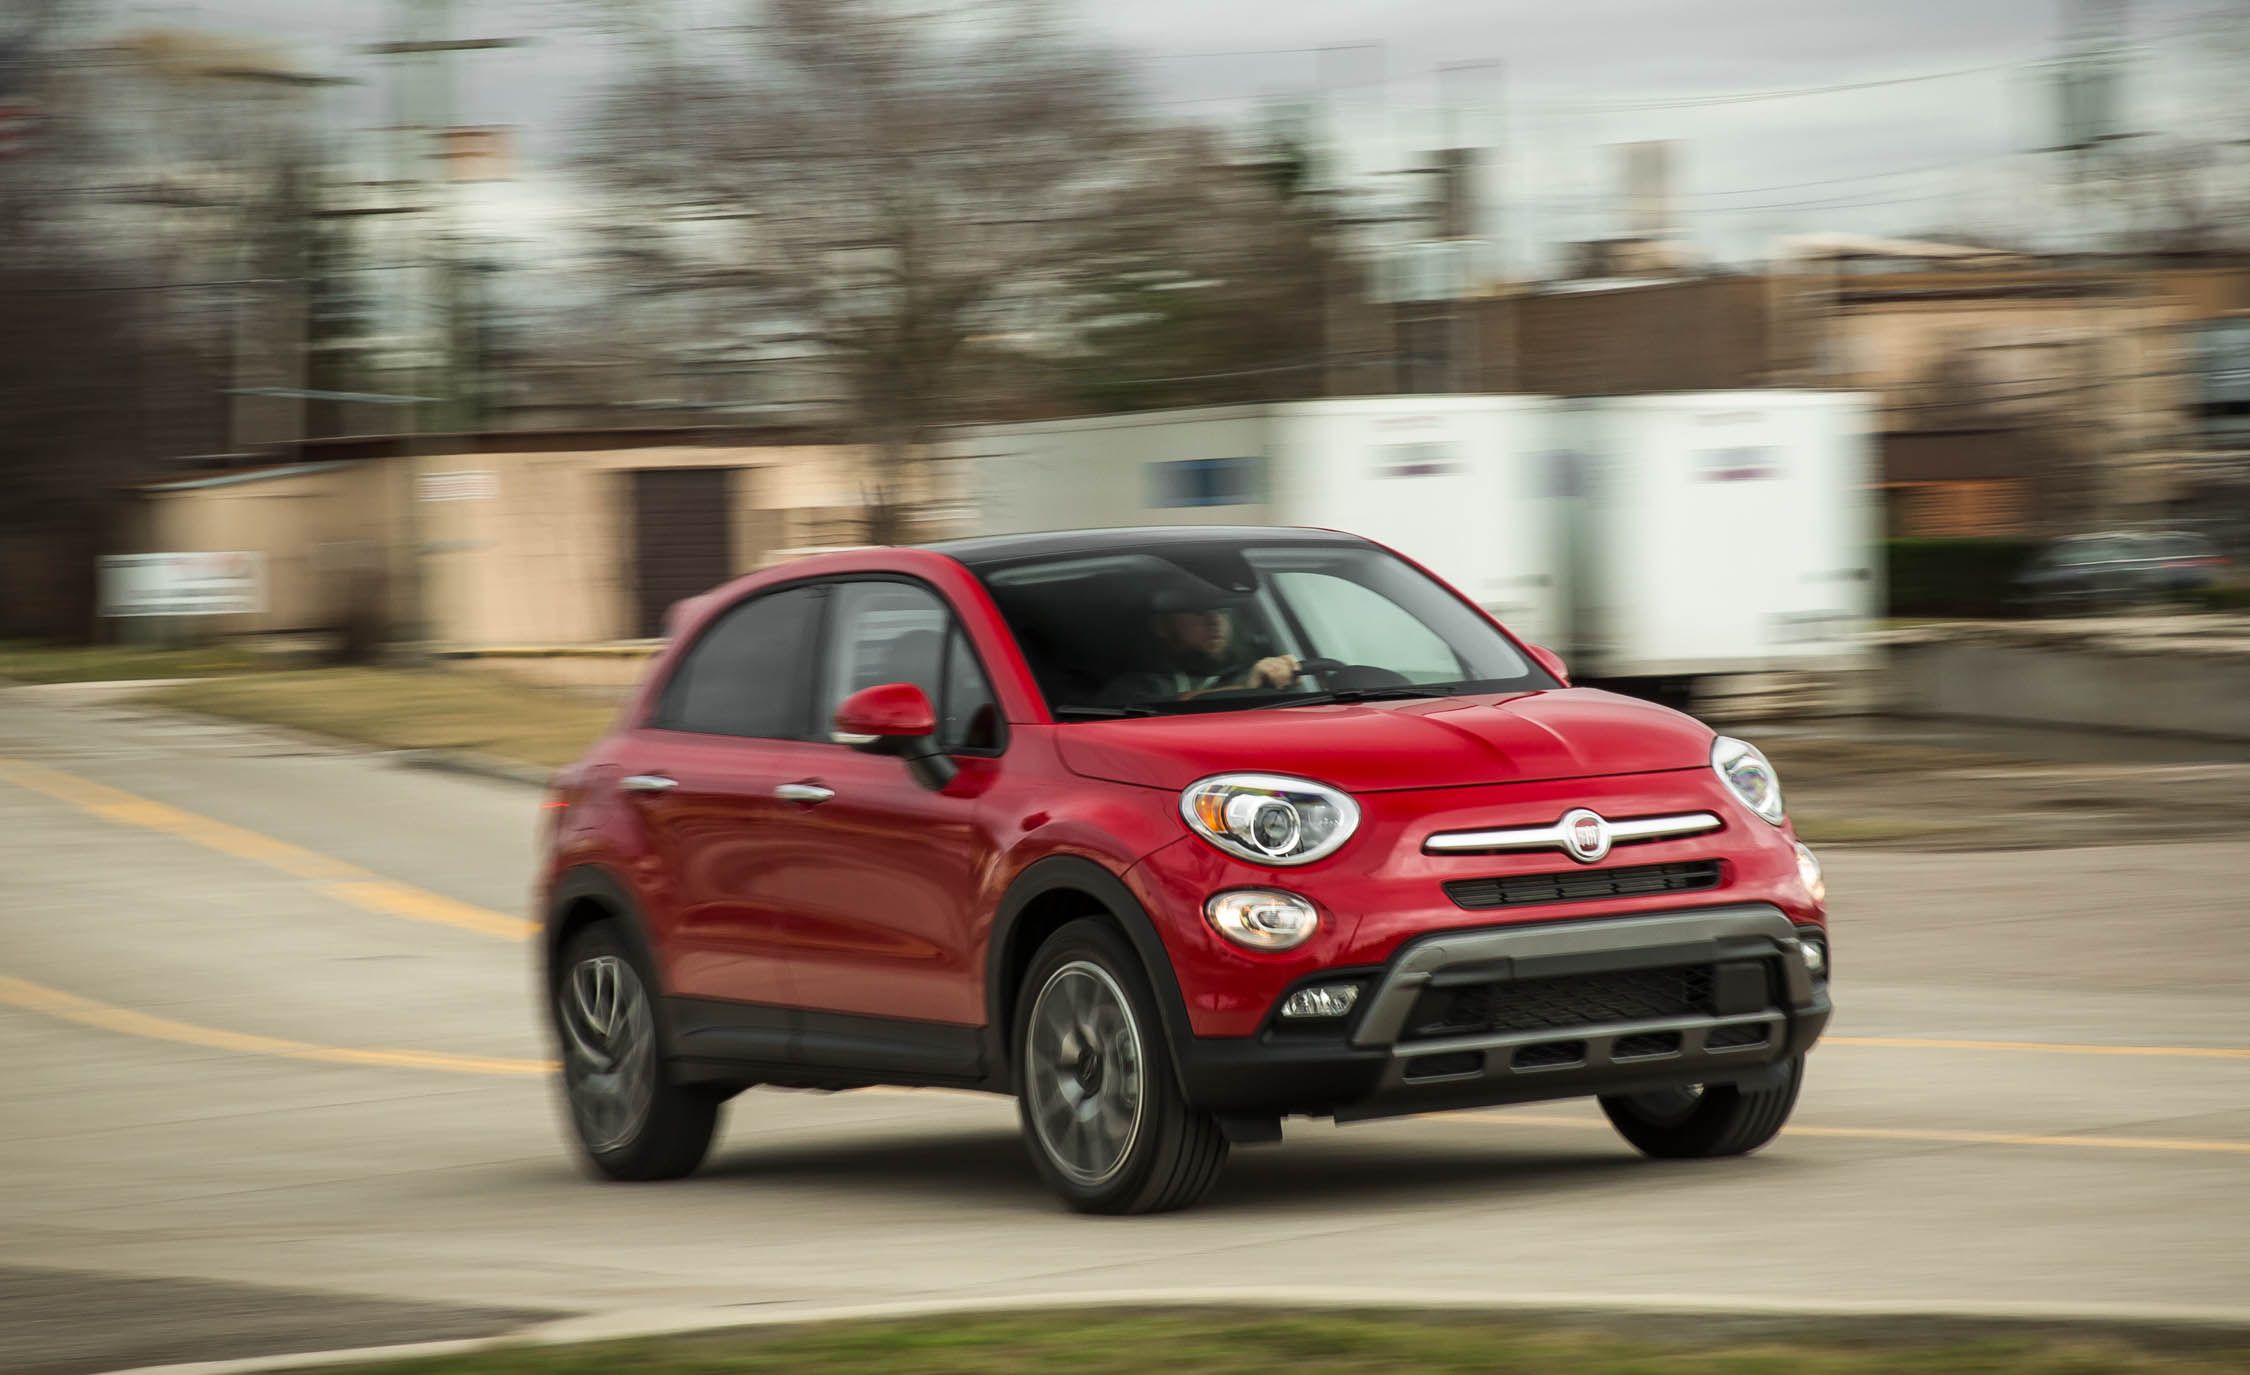 2017 FIAT 500X Prices, Reviews, and Photos - MotorTrend